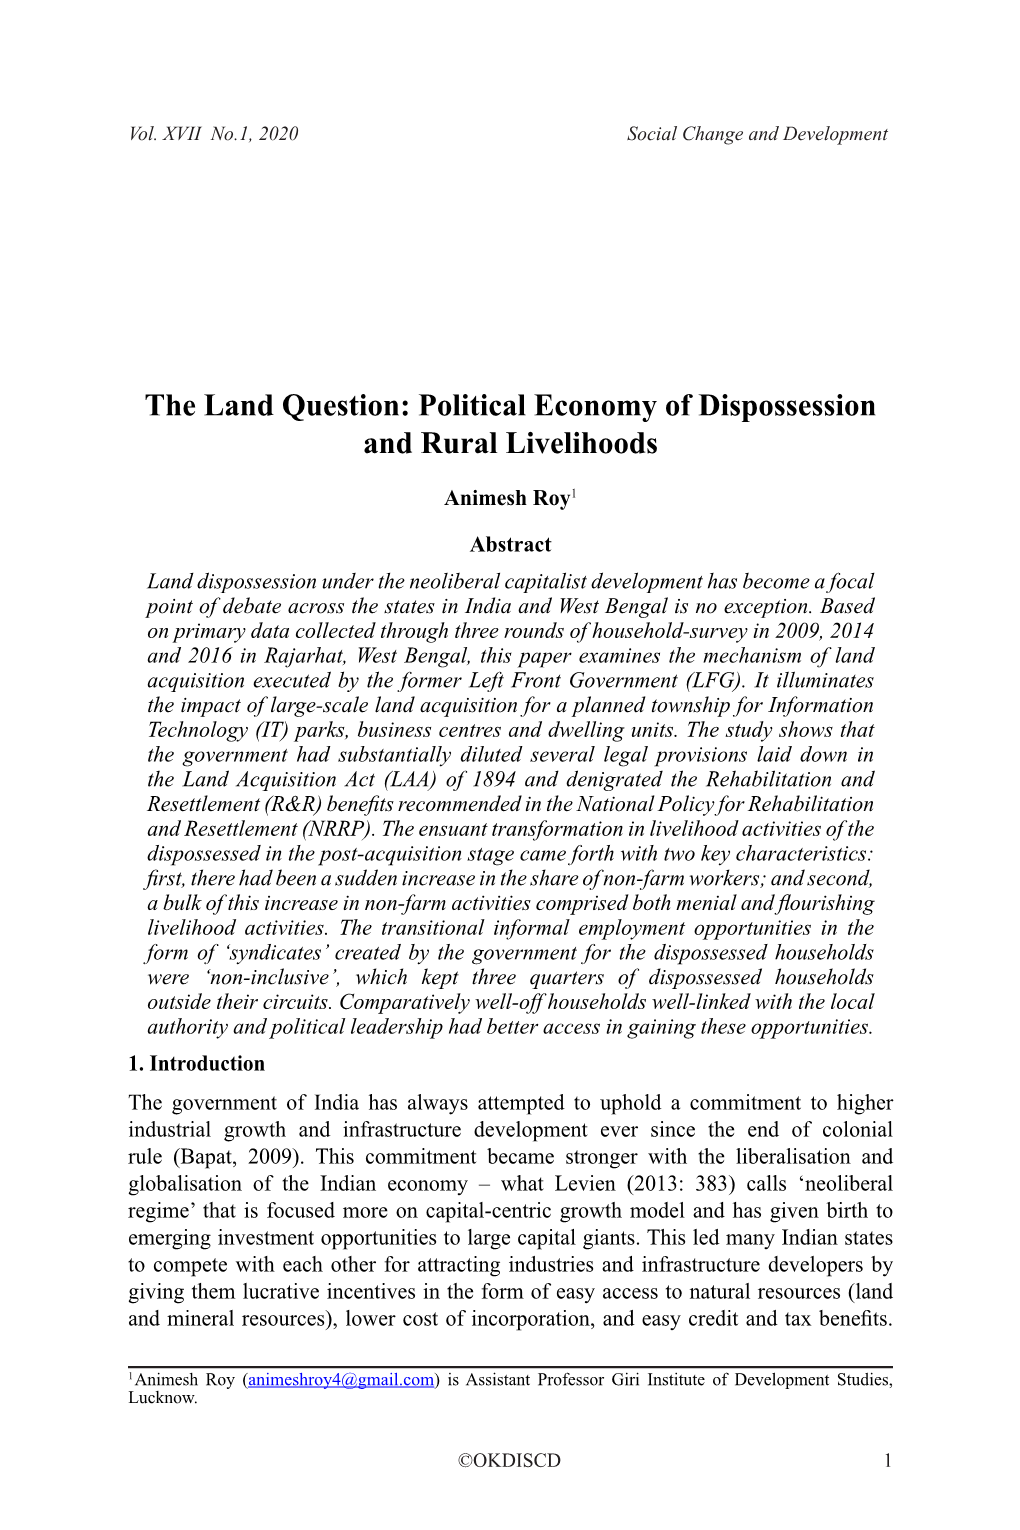 Political Economy of Dispossession and Rural Livelihoods